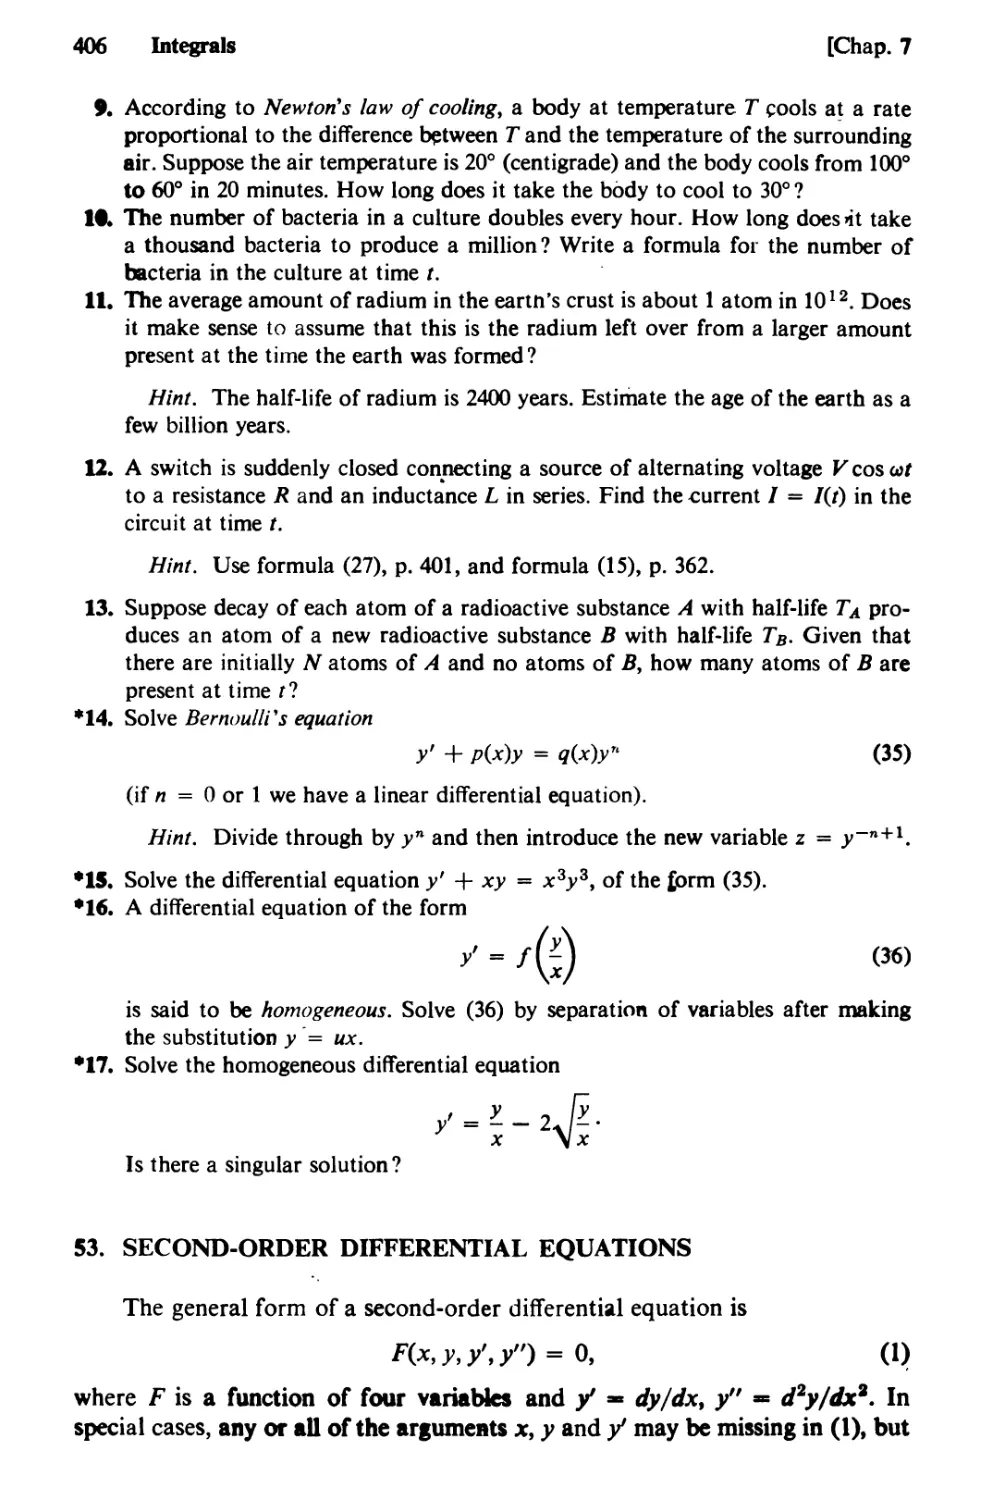 53. Second-Order Differential Equations